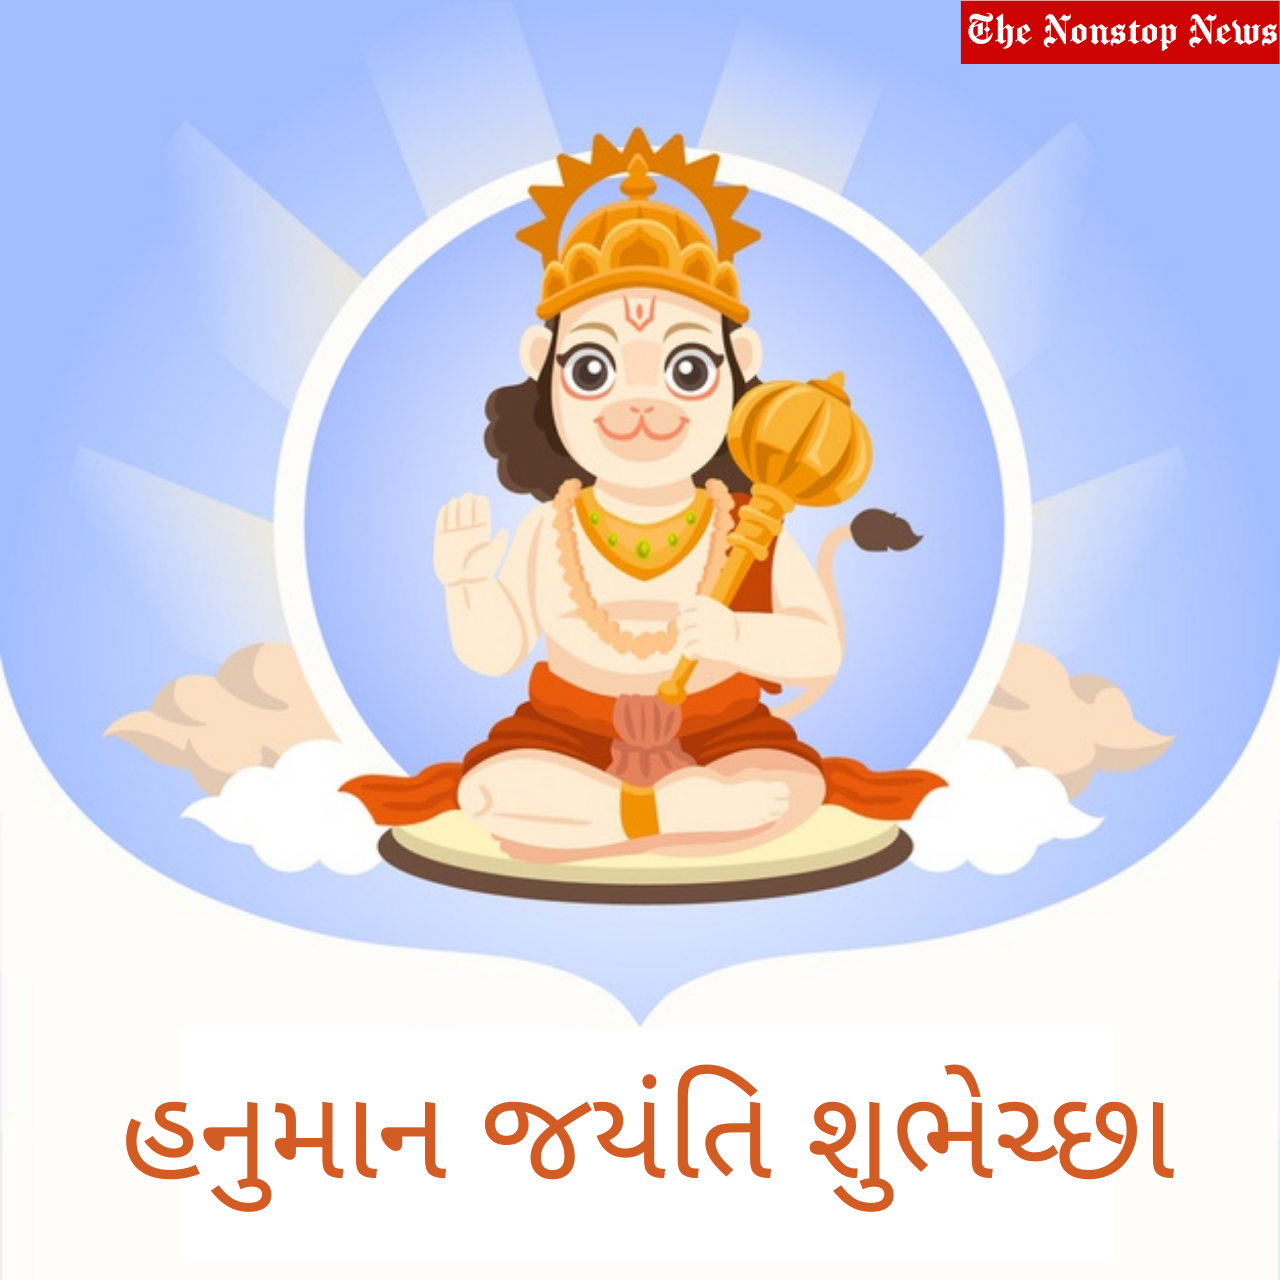 Happy Hanuman Jayanti 2021 wishes in Gujarati, Greetings, Images, Messages, and Quotes to Share